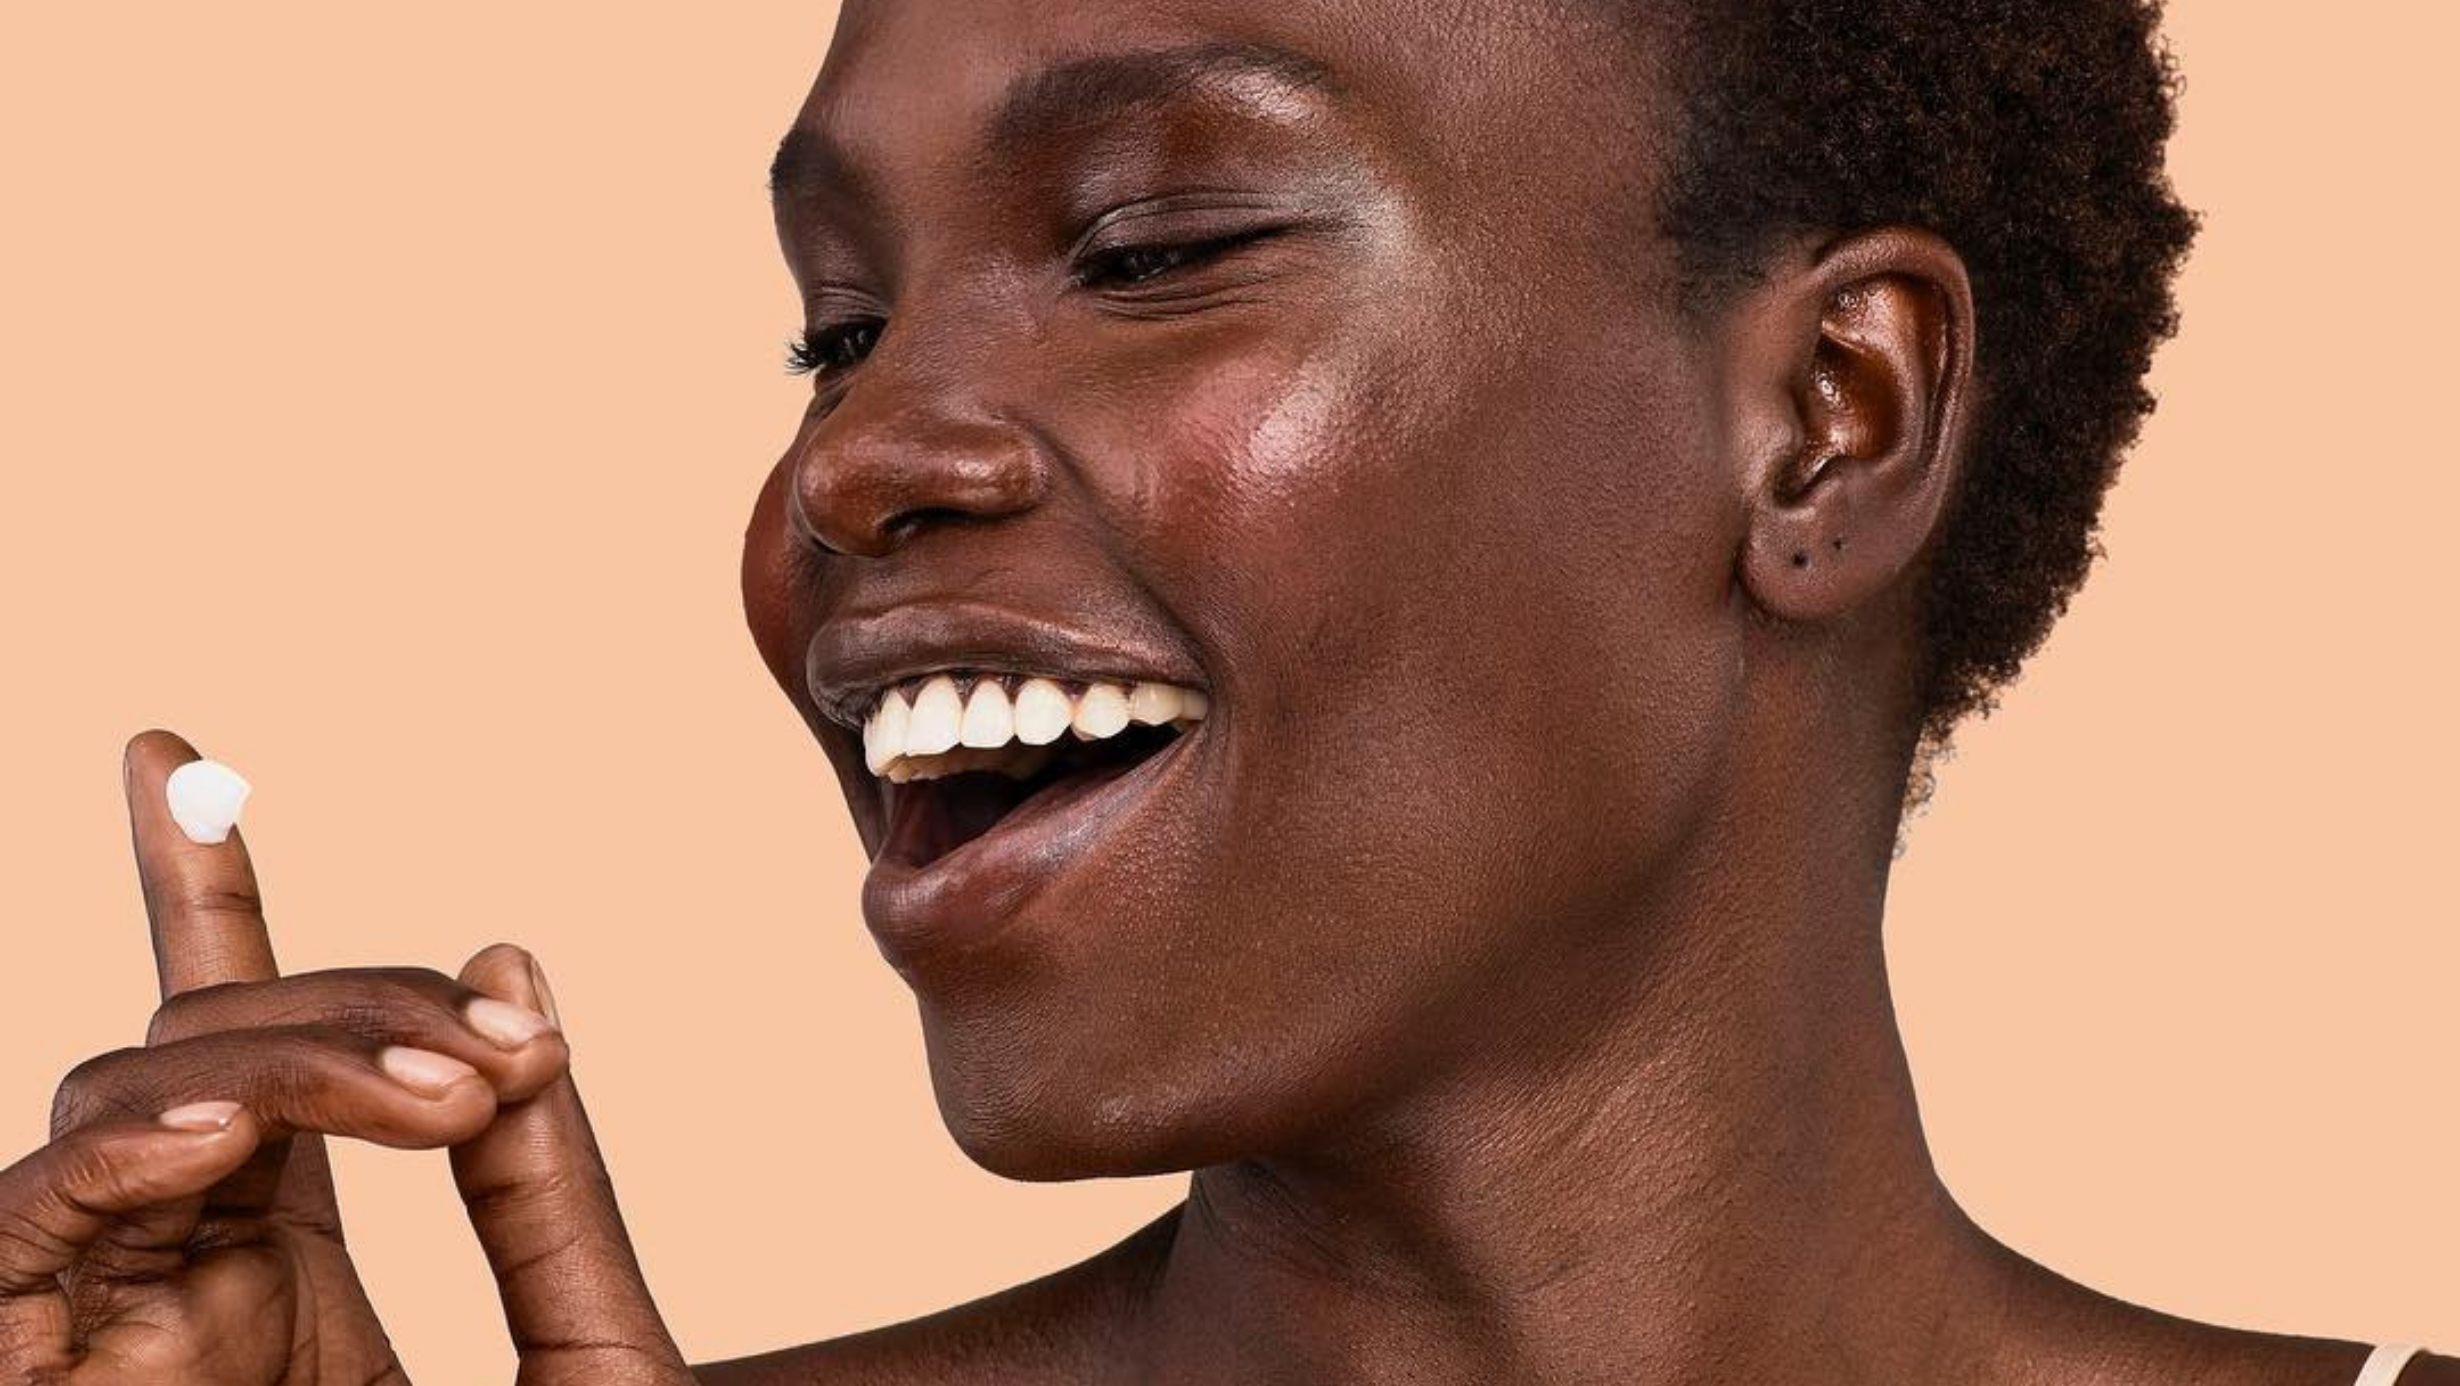 Summer Must-Haves: 10 Hydrating Body Moisturizers You Can Get From Amazon